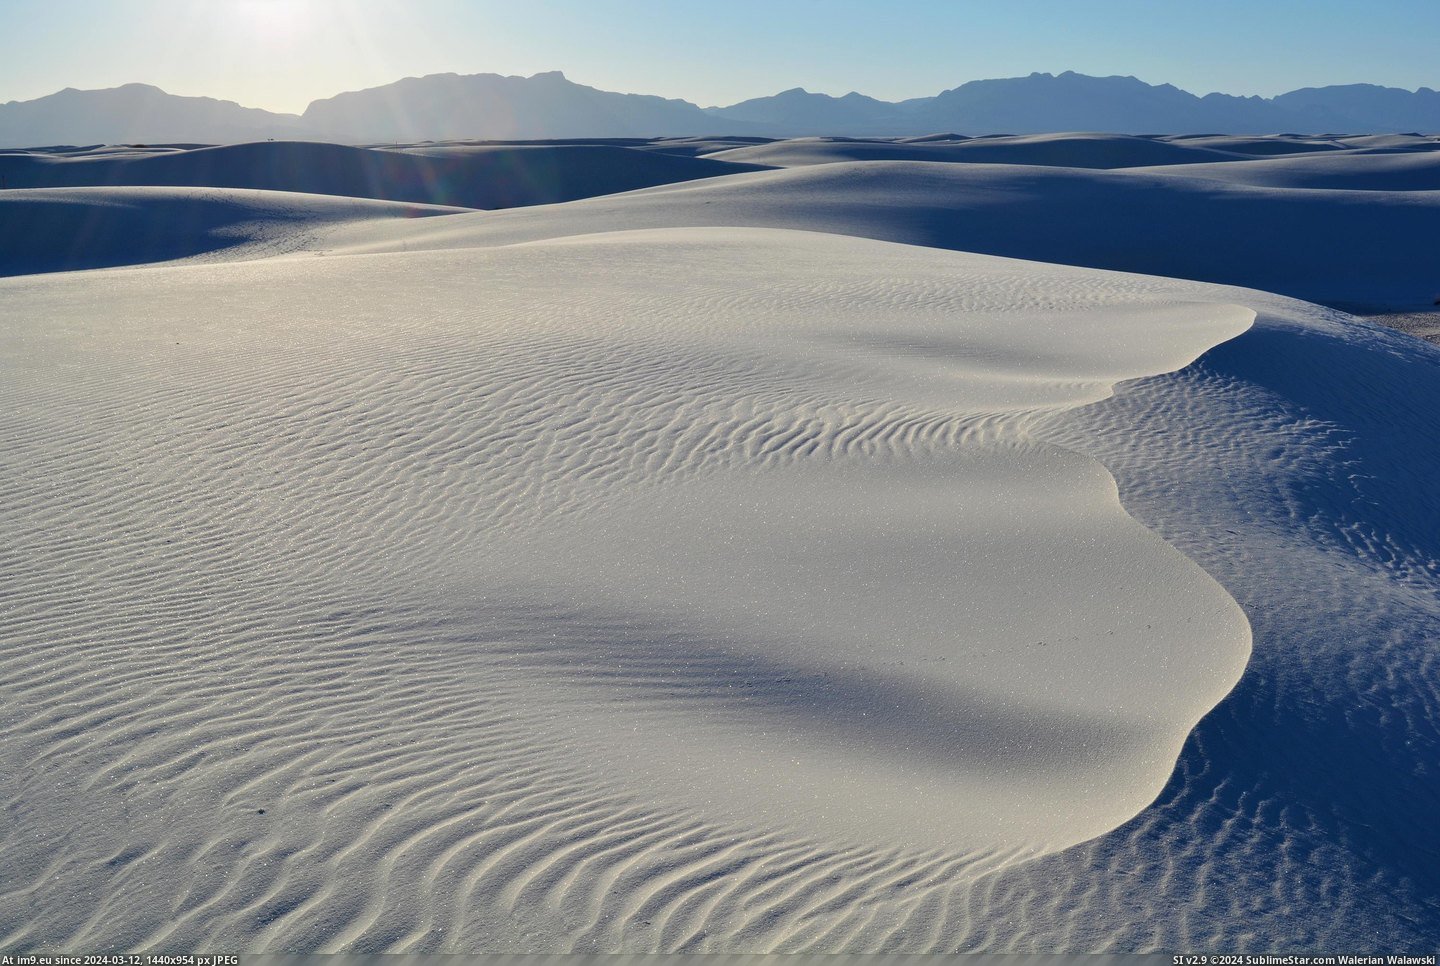 #White #Shot #3000x2000 #Sands #Nat #Monument #Hiking [Earthporn] Recent shot while hiking at White Sands Nat'l Monument, NM  [3000x2000] Pic. (Изображение из альбом My r/EARTHPORN favs))